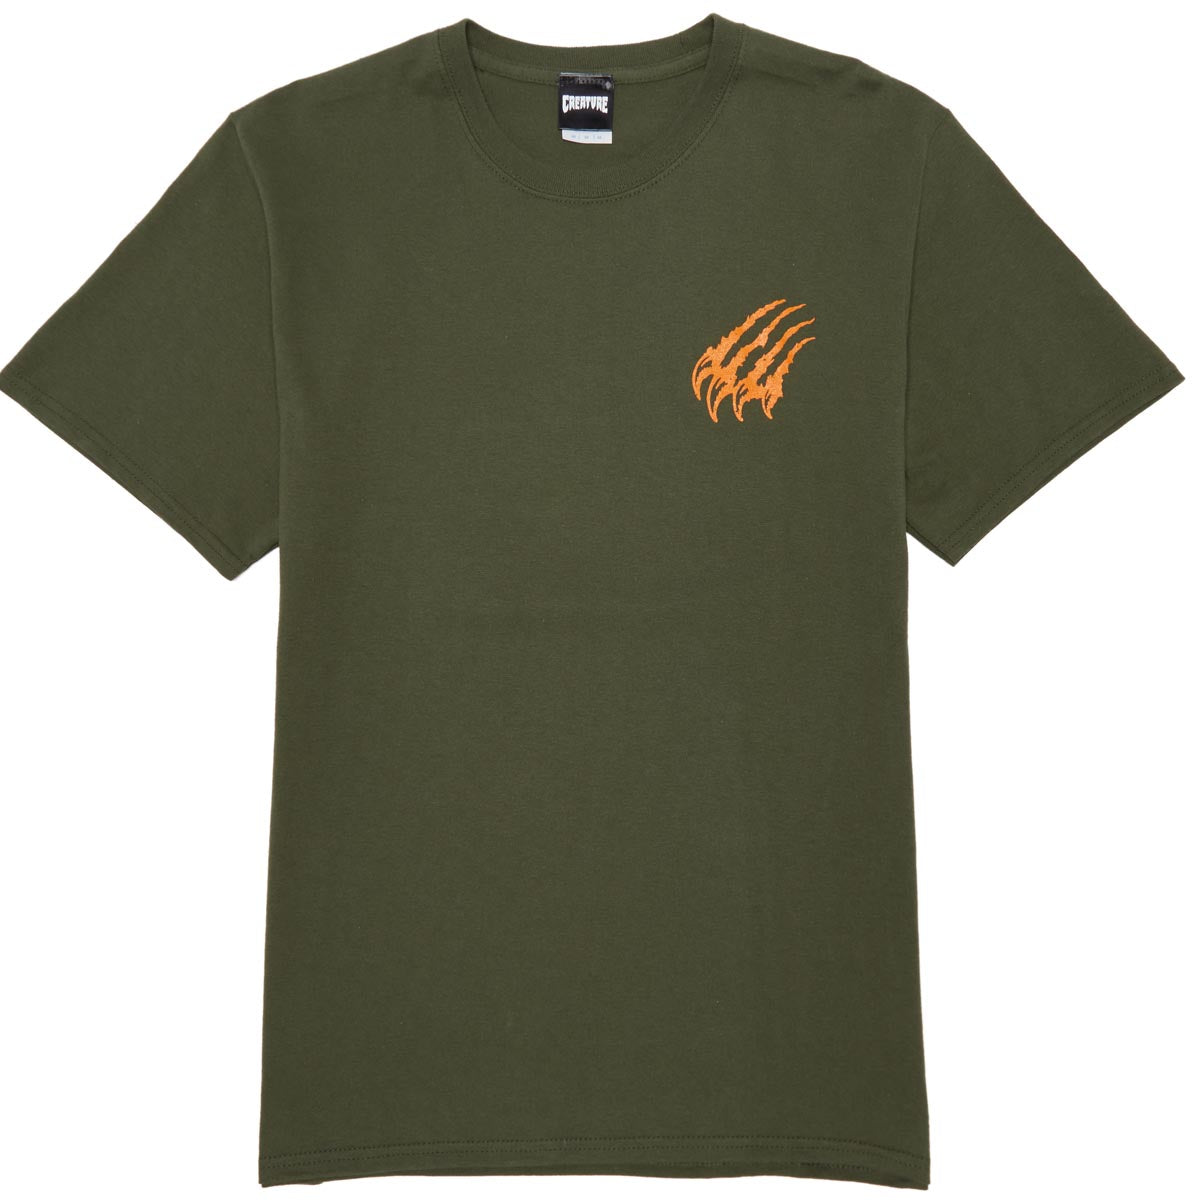 Creature The Creeper T-Shirt - Olive image 2